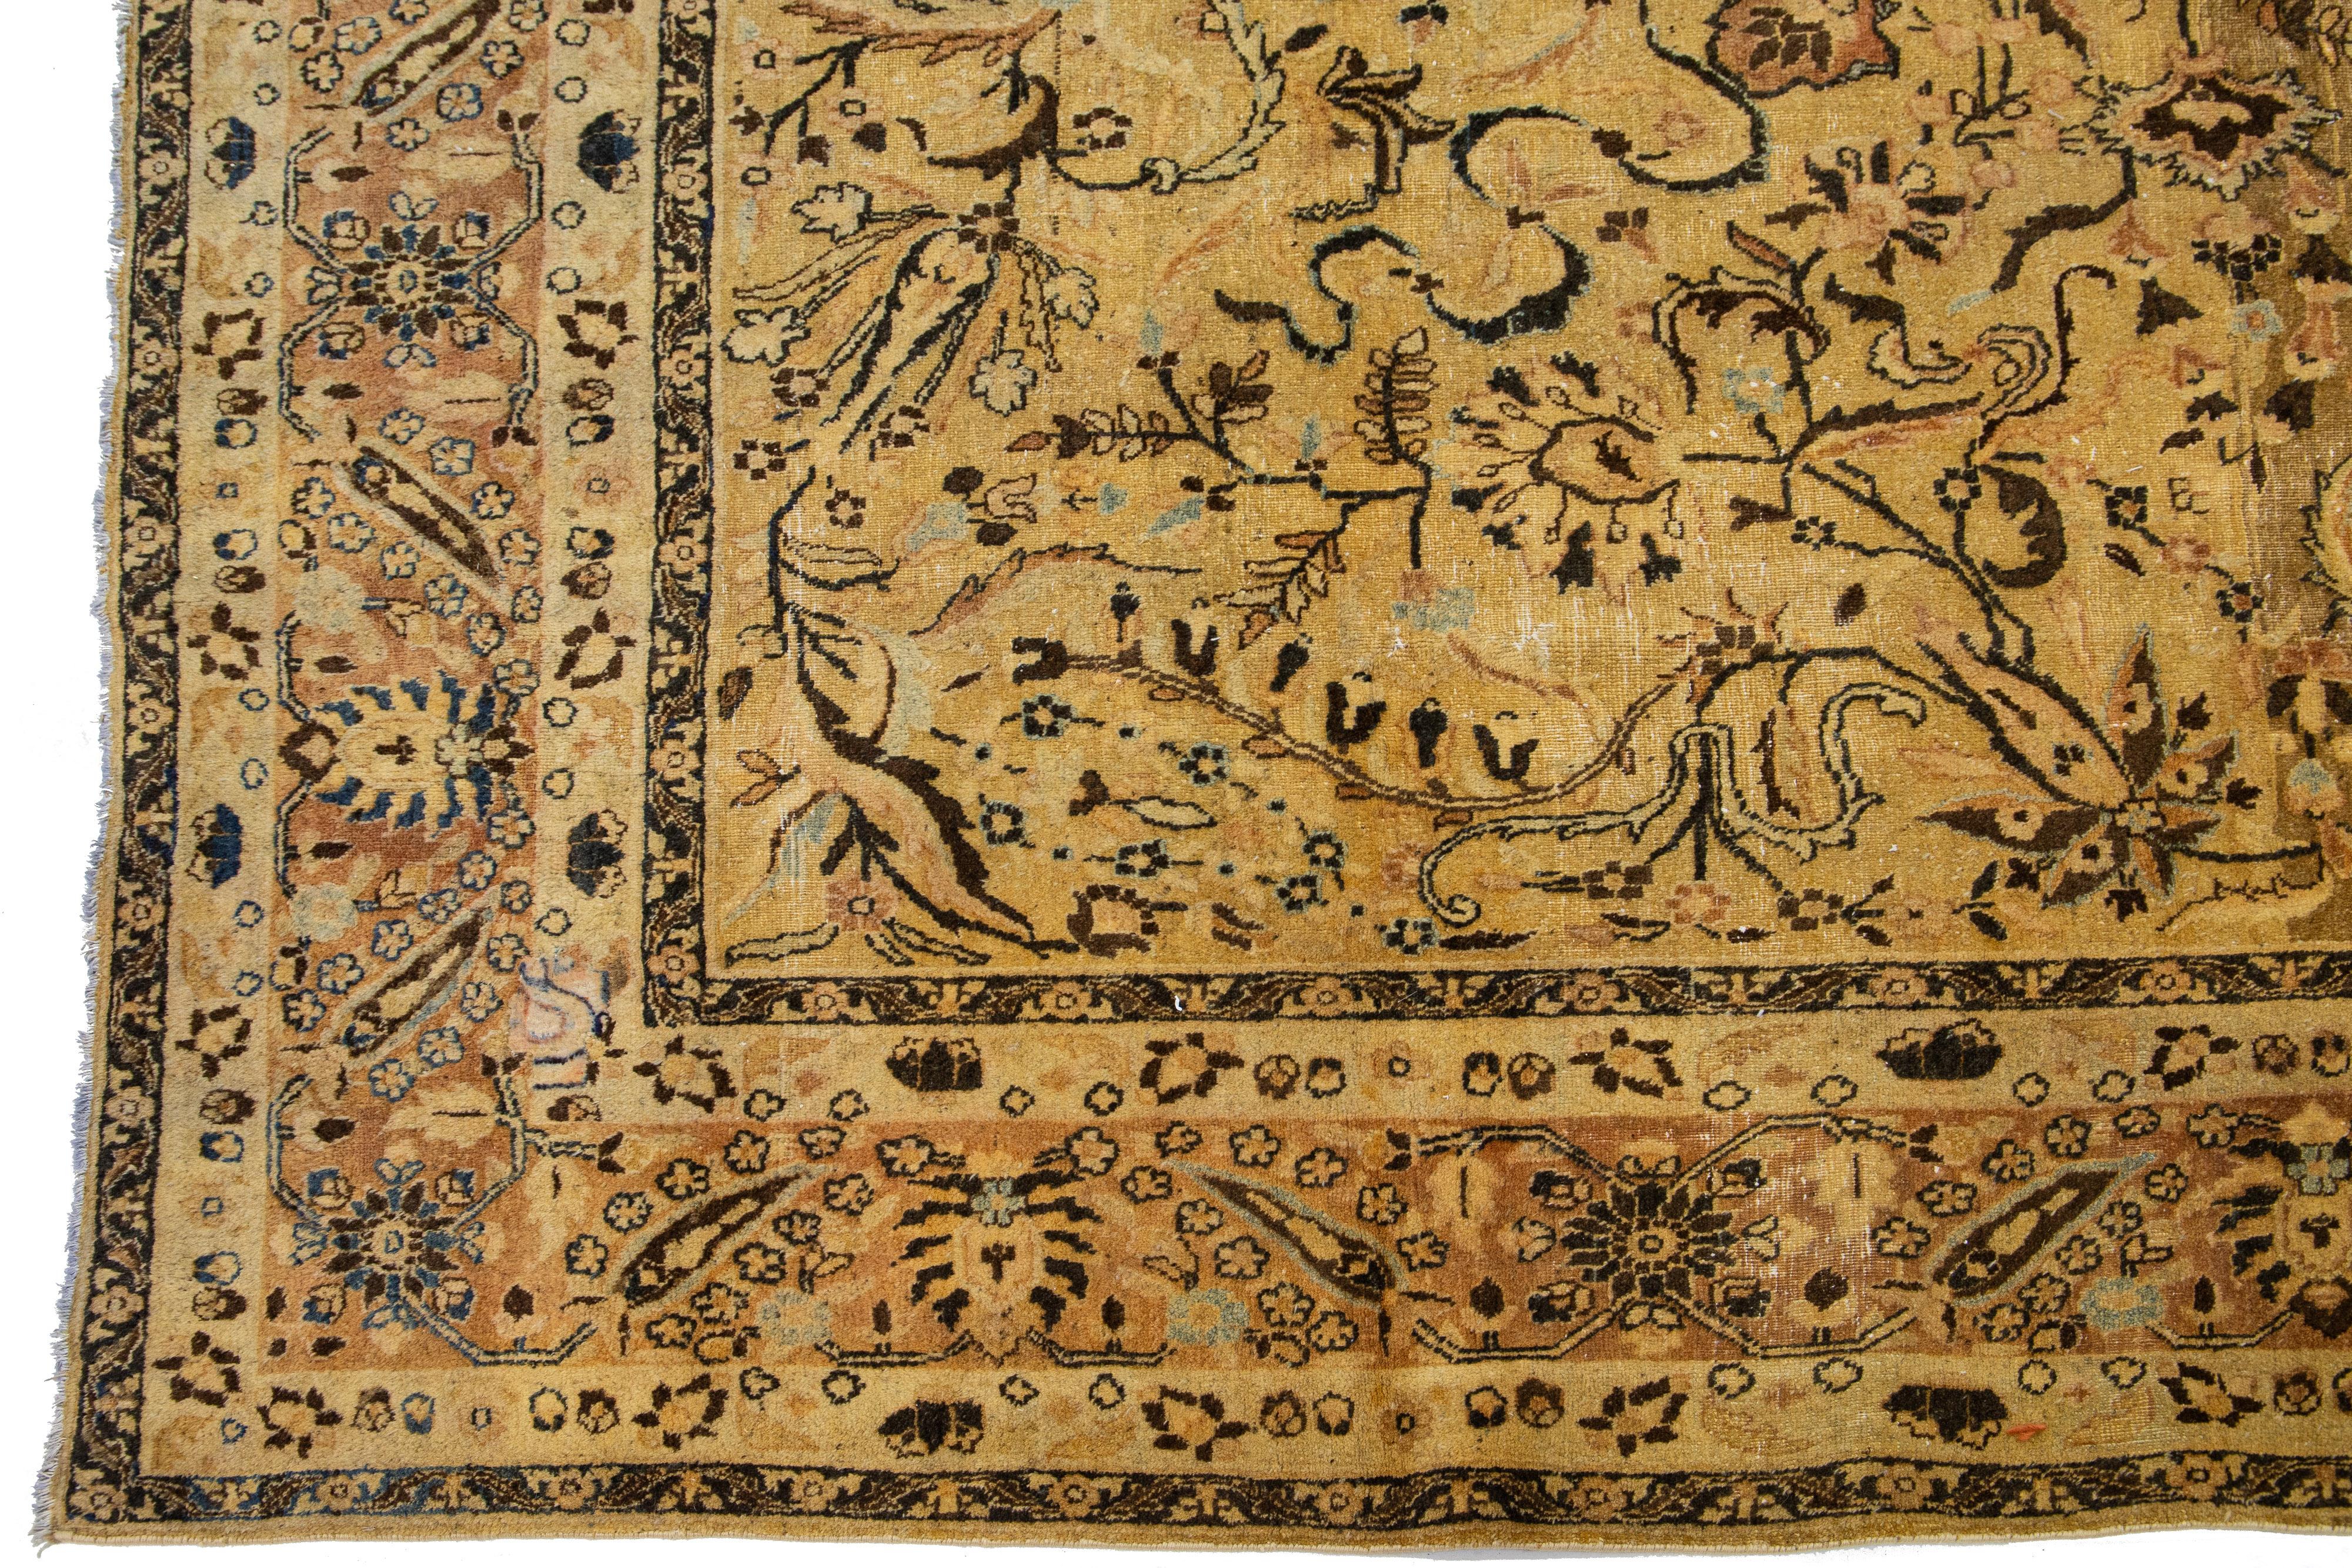 Antique Persian Tabriz Wool Rug With Allover Floral In Golden Color In Excellent Condition For Sale In Norwalk, CT